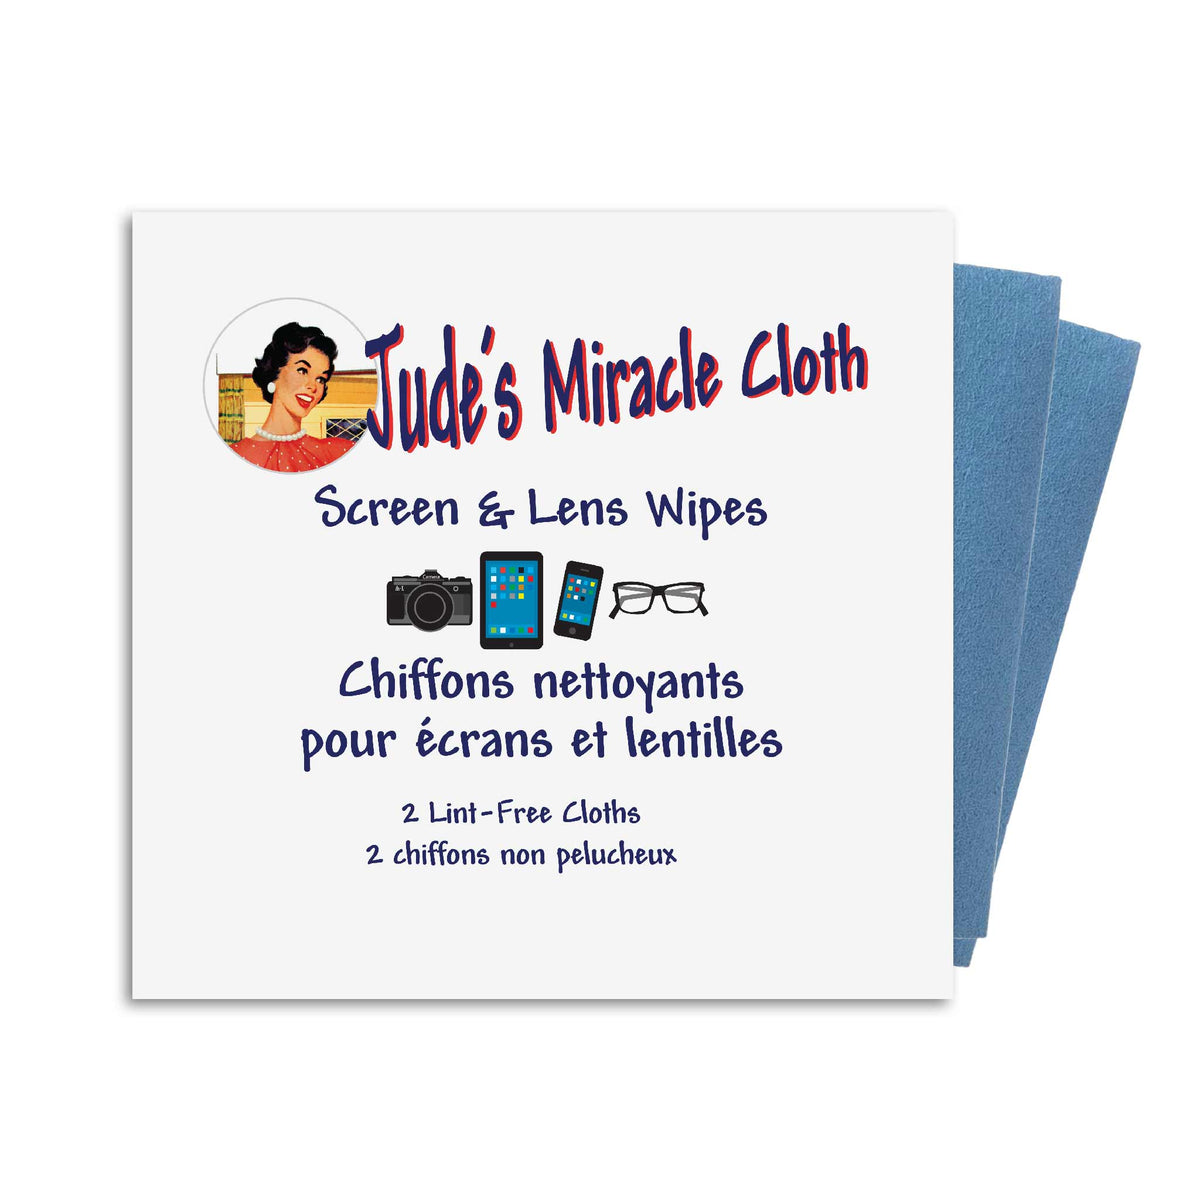 Jude's Miracle Cloth- Screen & Lens Wipes